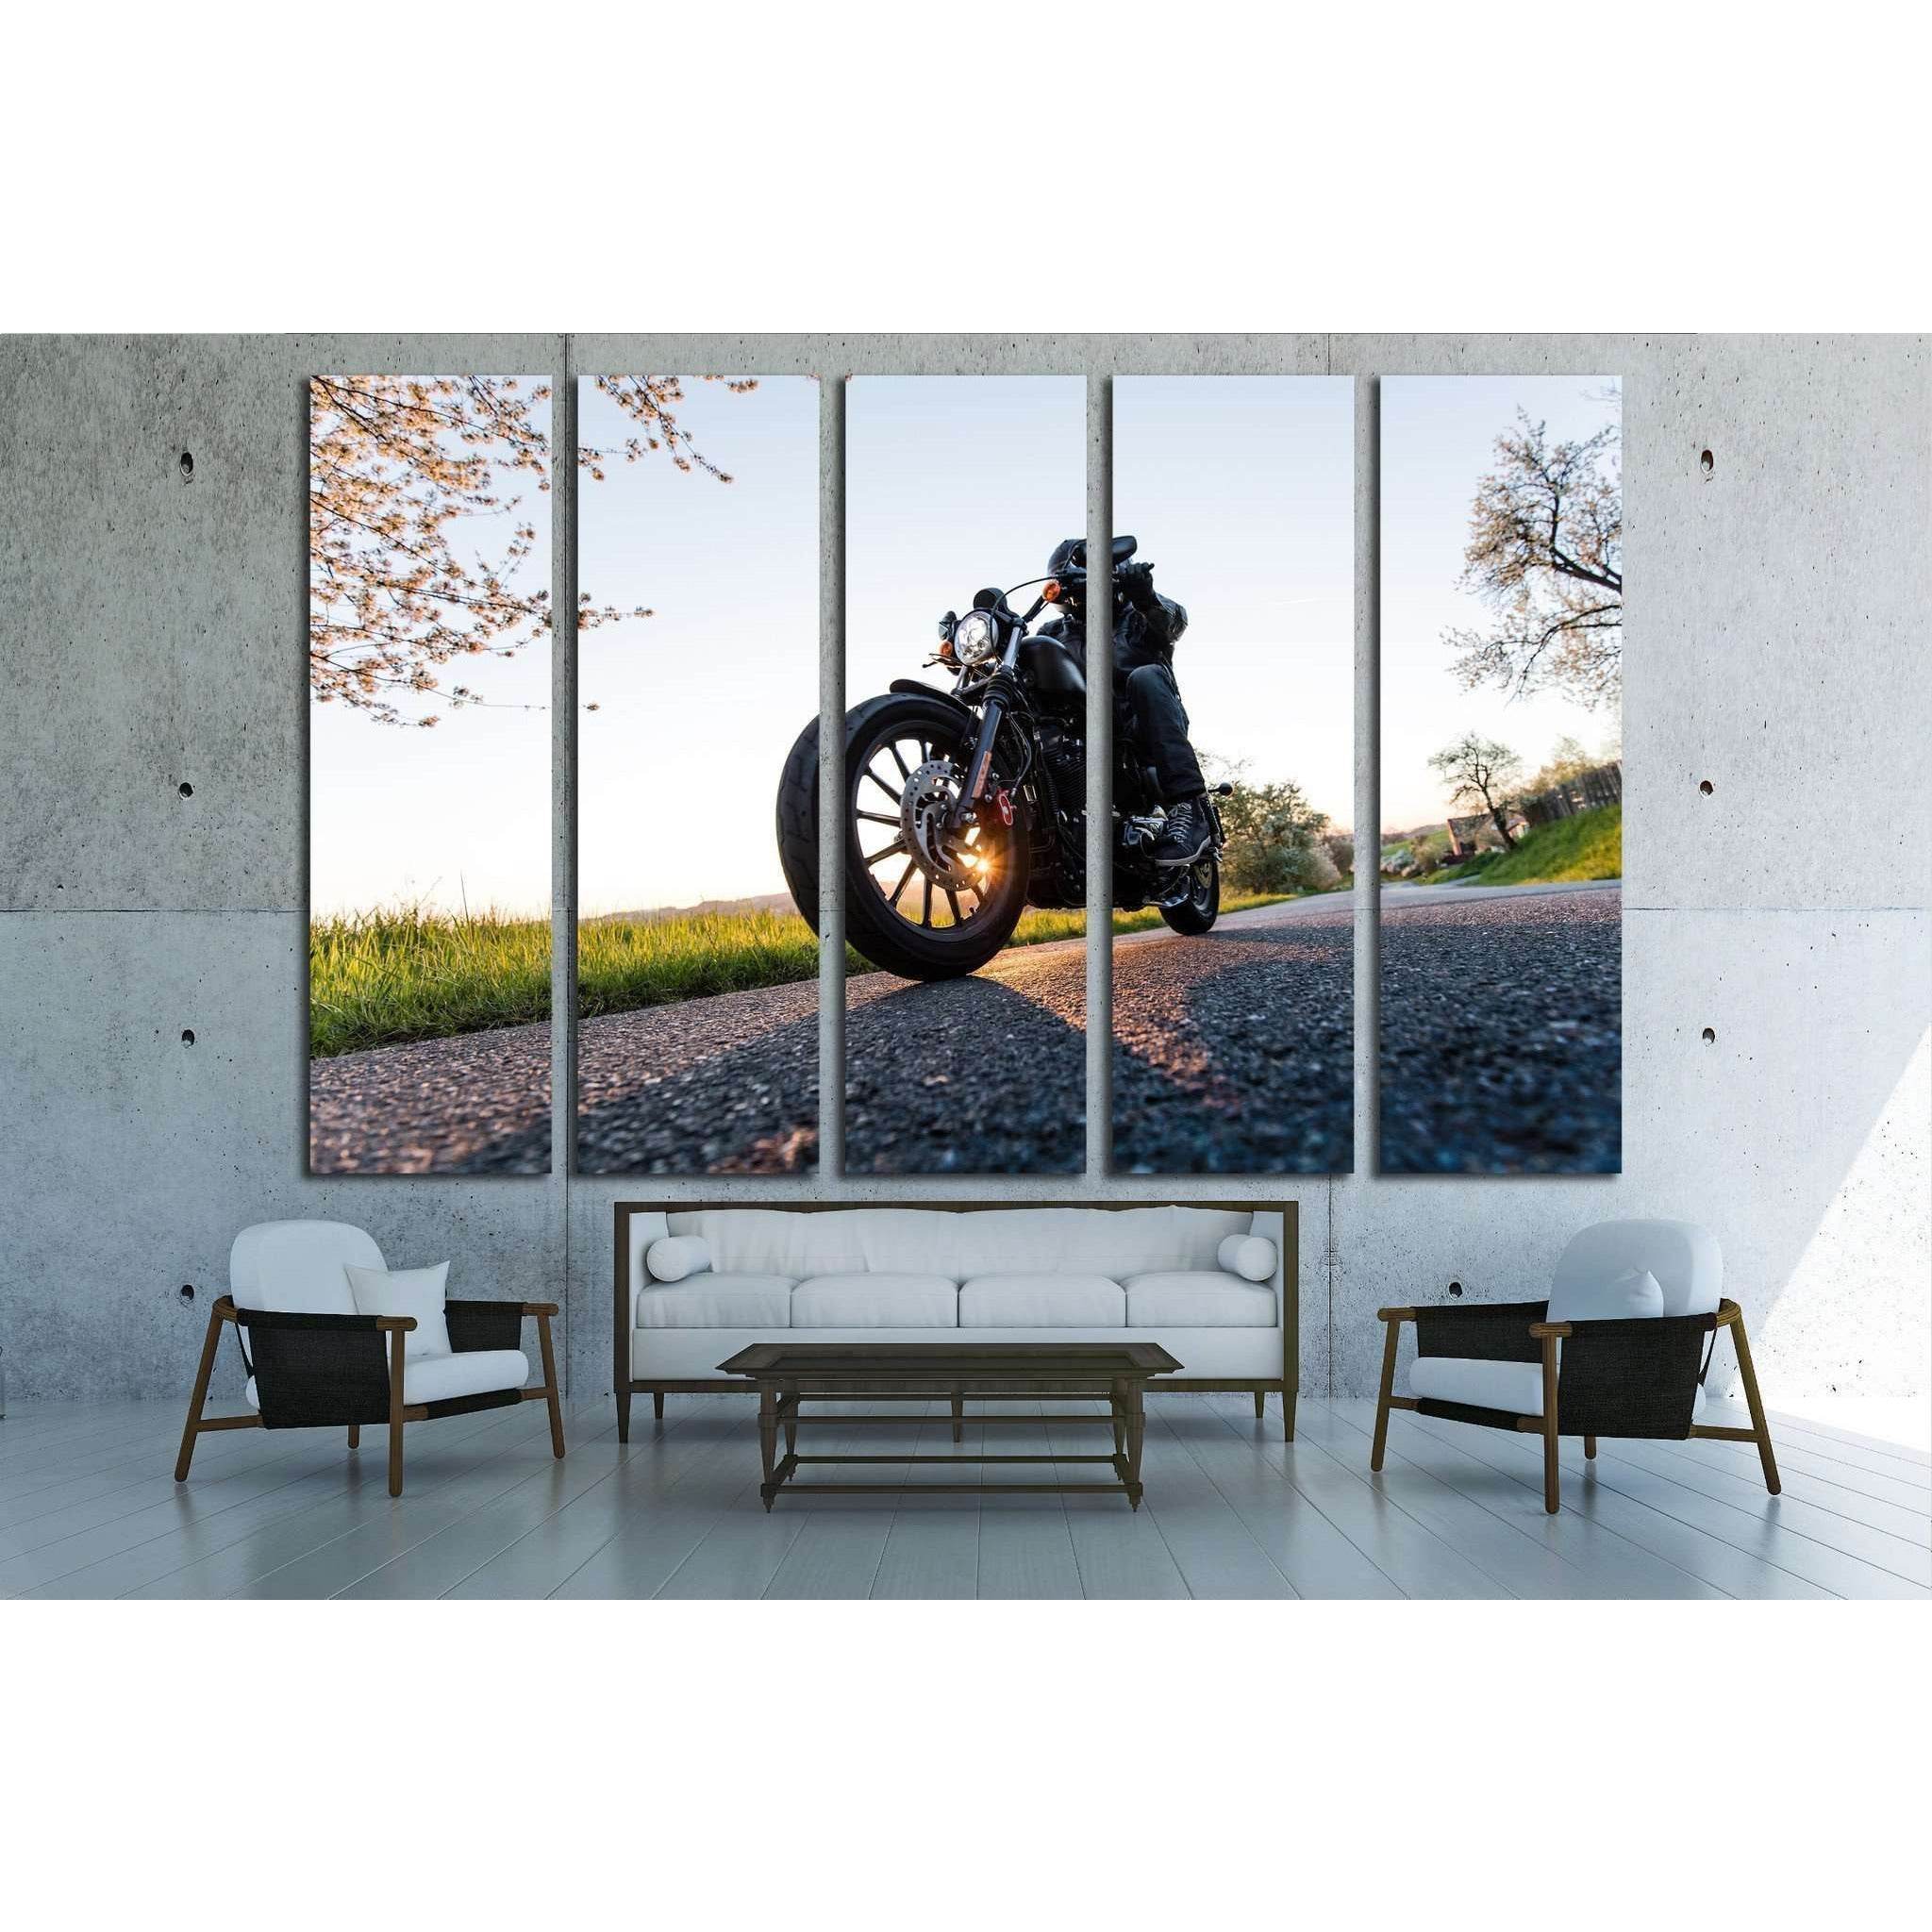 Man sat on motorcycle on the road during sunrise №1874 Ready to Hang Canvas Print